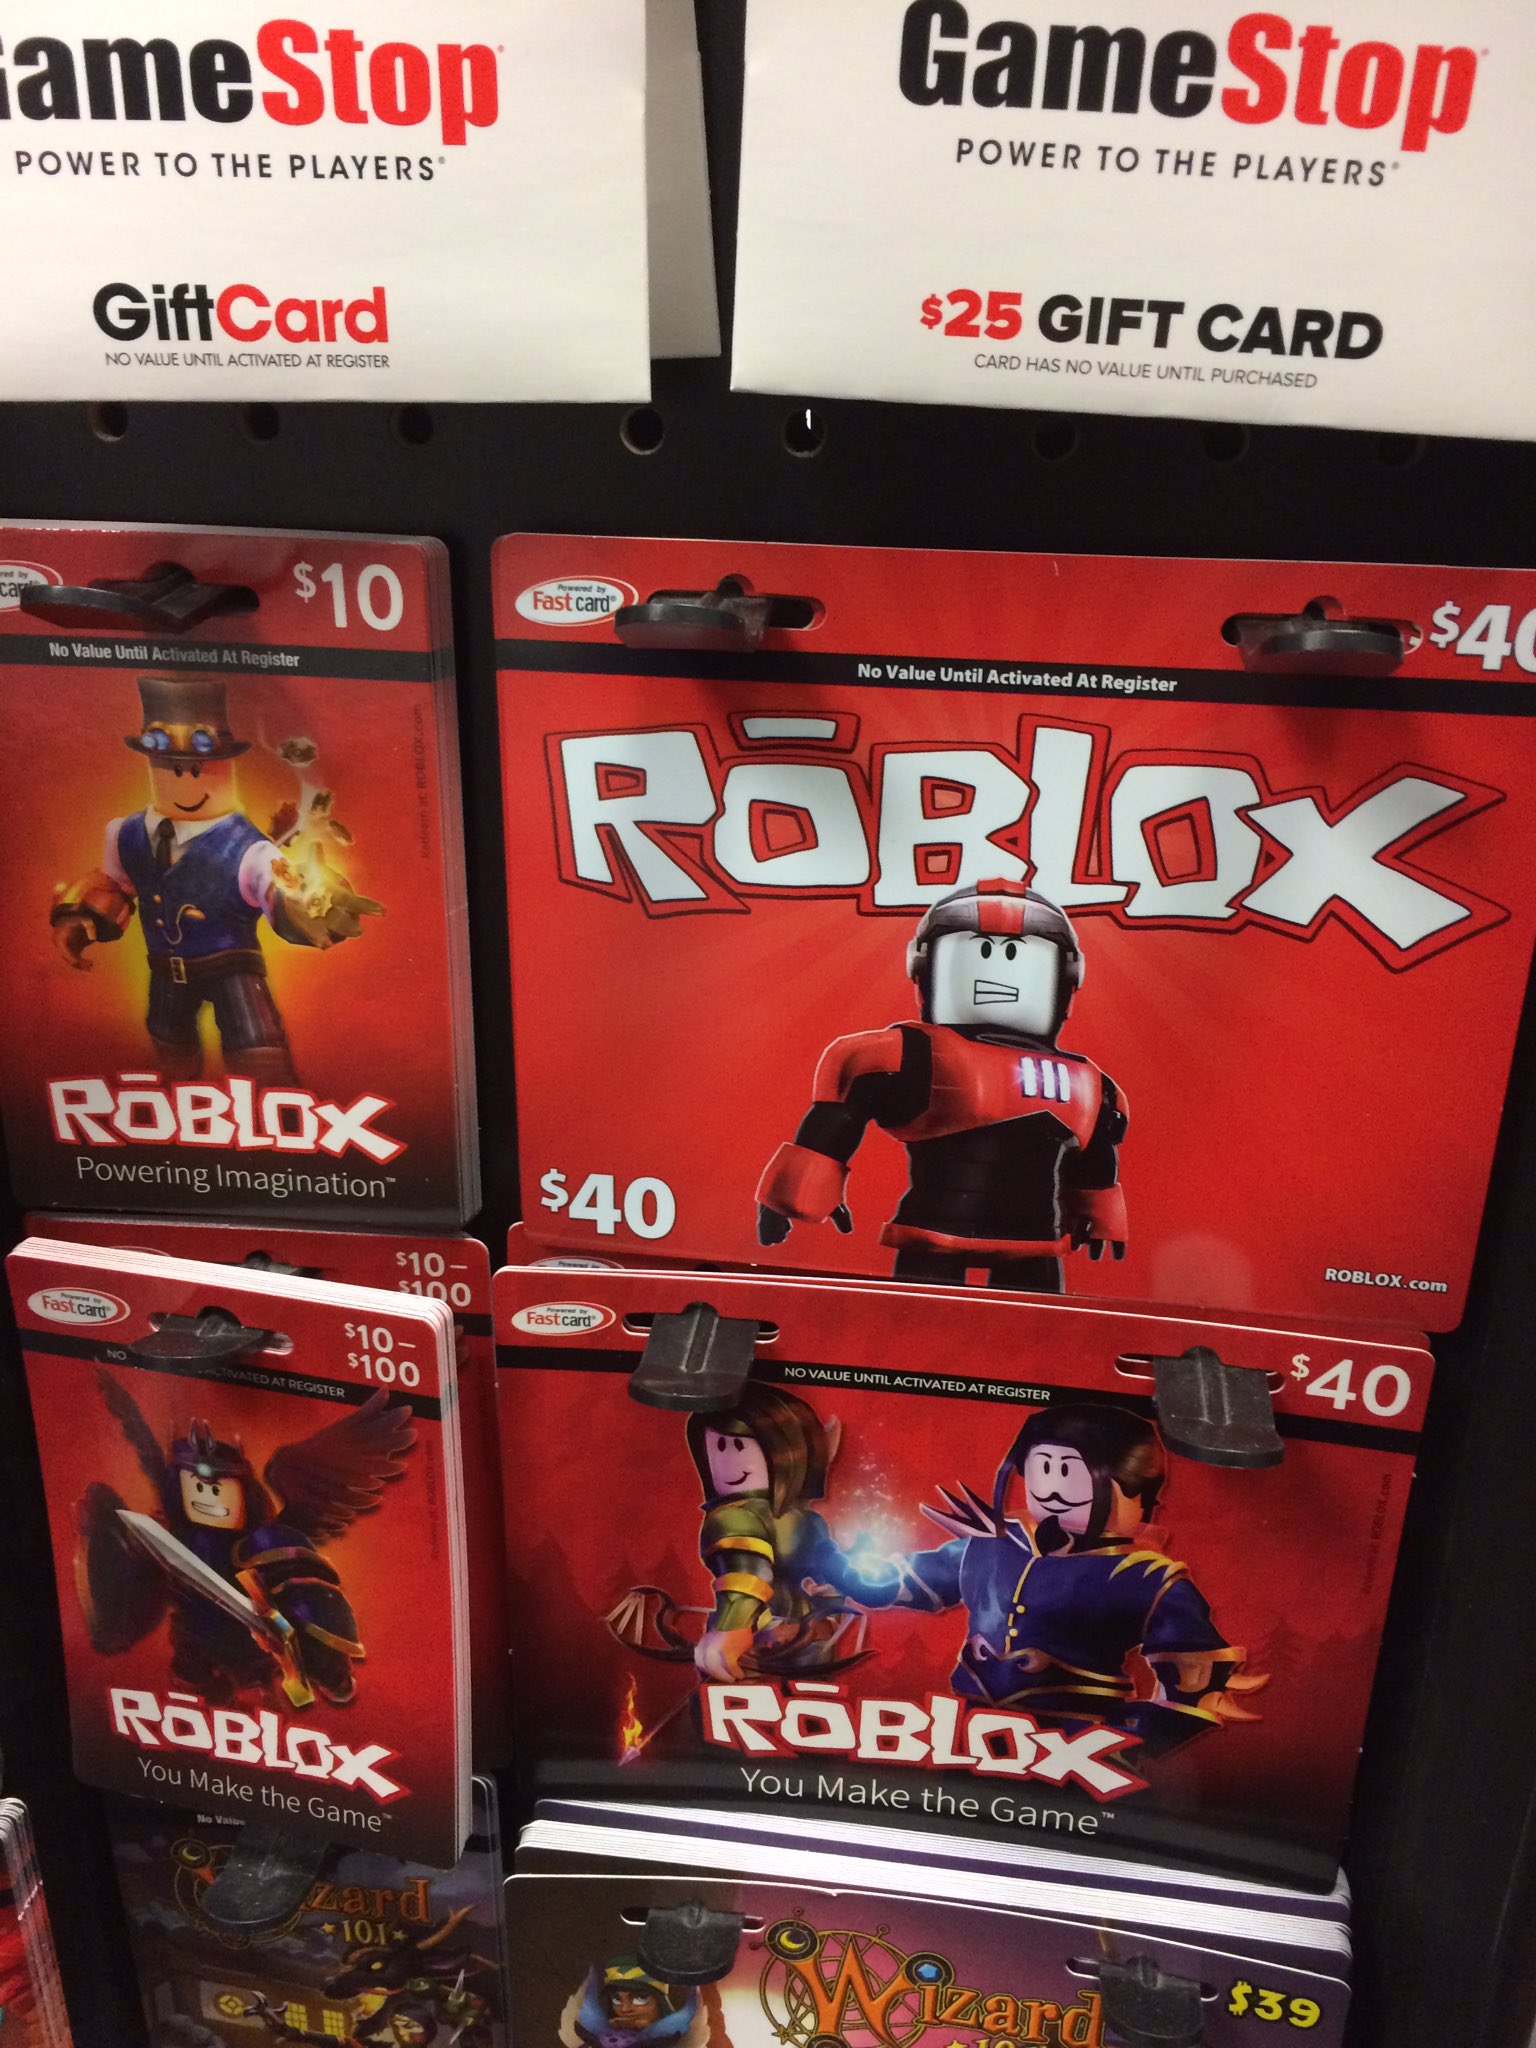 Gamestop Roblox Gift Card Cheaper Than Retail Price Buy Clothing Accessories And Lifestyle Products For Women Men - buying robux online with a game stop gift card